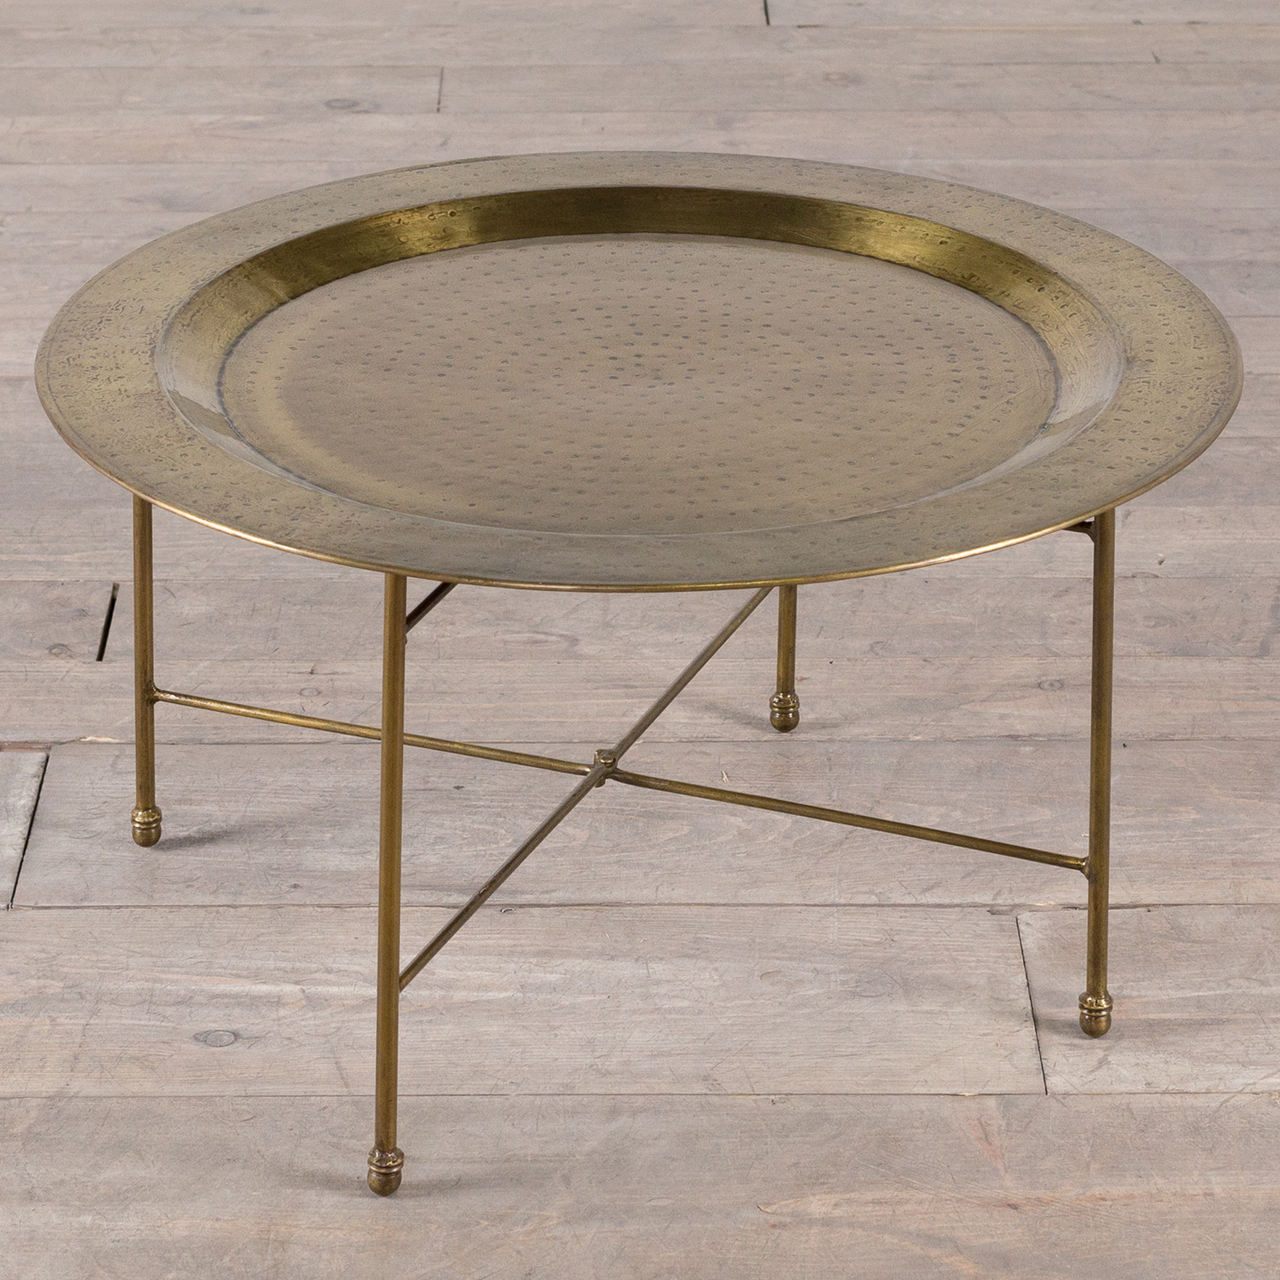 antique brass plated round coffee table end set homesense area rugs medium wood tables charging station organiser large accent tree trunk nightstand small black bedside cabinets